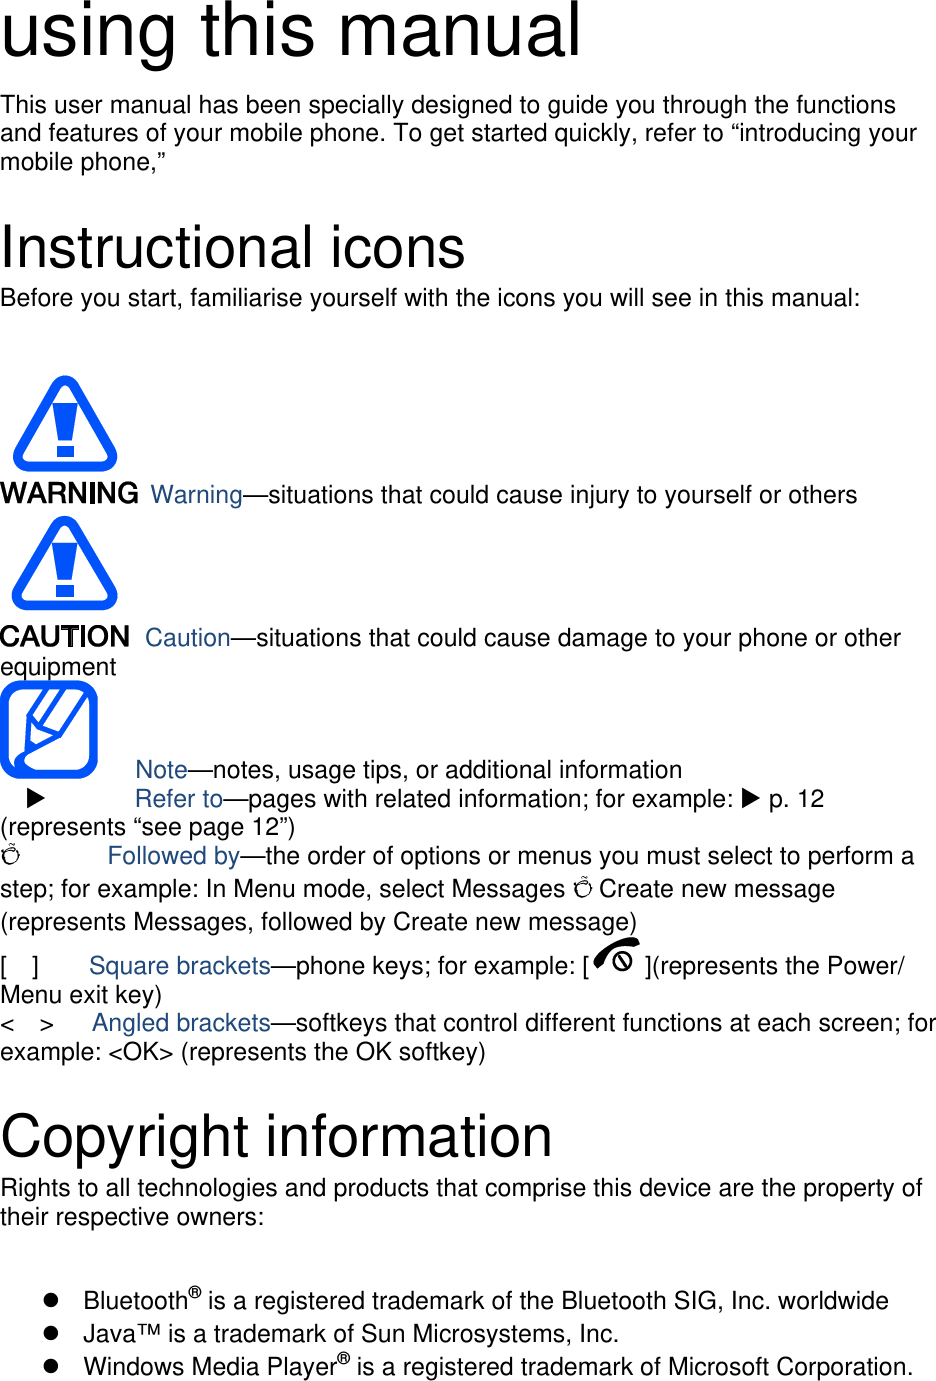 using this manual This user manual has been specially designed to guide you through the functions and features of your mobile phone. To get started quickly, refer to “introducing your mobile phone,”  Instructional icons Before you start, familiarise yourself with the icons you will see in this manual:     Warning—situations that could cause injury to yourself or others  Caution—situations that could cause damage to your phone or other equipment    Note—notes, usage tips, or additional information   X       Refer to—pages with related information; for example: X p. 12 (represents “see page 12”) Õ       Followed by—the order of options or menus you must select to perform a step; for example: In Menu mode, select Messages Õ Create new message (represents Messages, followed by Create new message) [  ]    Square brackets—phone keys; for example: [ ](represents the Power/ Menu exit key) &lt;  &gt;   Angled brackets—softkeys that control different functions at each screen; for example: &lt;OK&gt; (represents the OK softkey)  Copyright information Rights to all technologies and products that comprise this device are the property of their respective owners:  z Bluetooth® is a registered trademark of the Bluetooth SIG, Inc. worldwide z  Java™ is a trademark of Sun Microsystems, Inc. z Windows Media Player® is a registered trademark of Microsoft Corporation. 